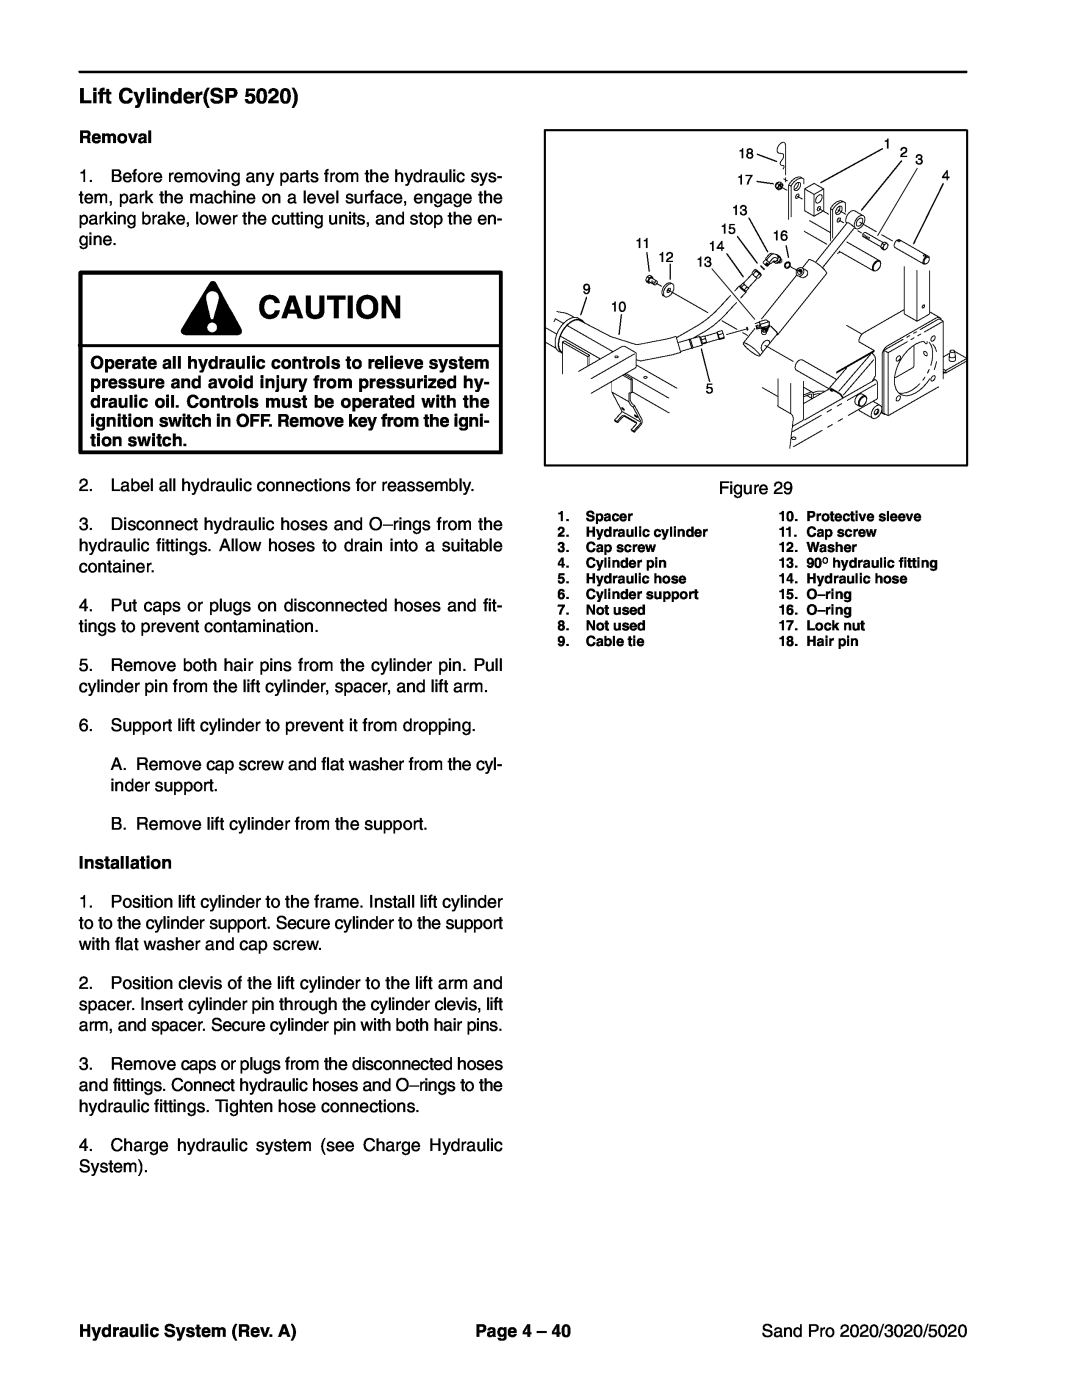 Toro service manual Lift CylinderSP, Removal, Installation, Hydraulic System Rev. A, Page 4, Sand Pro 2020/3020/5020 